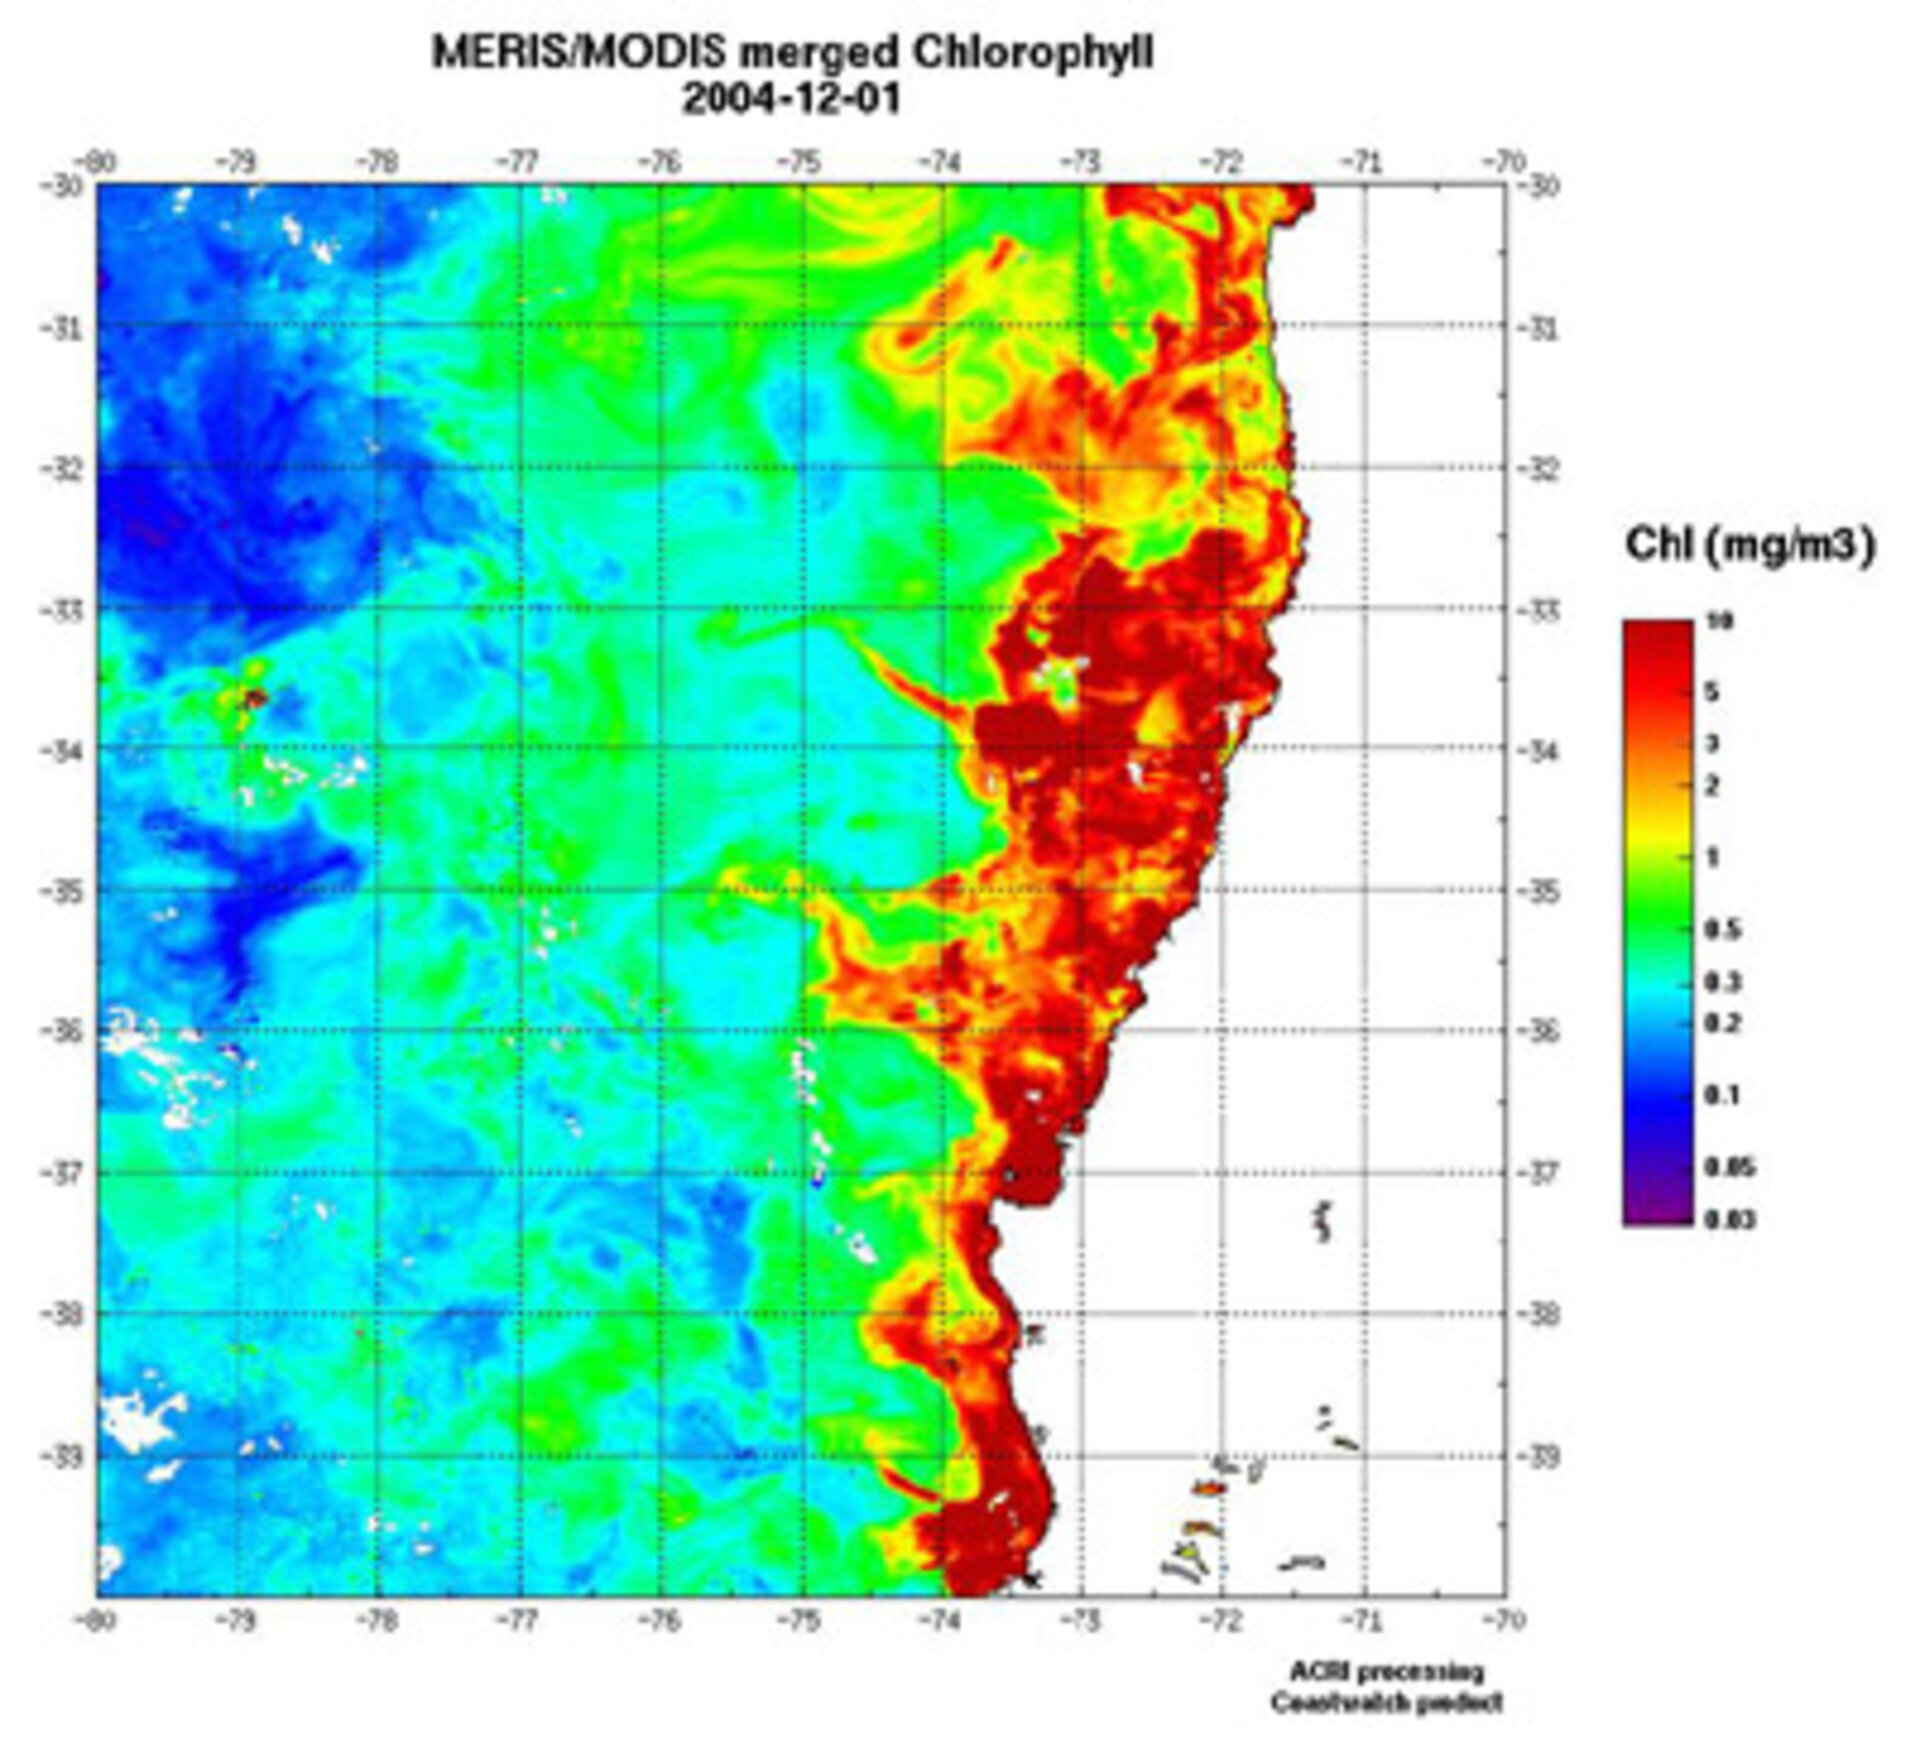 Upwelling zone off Chile